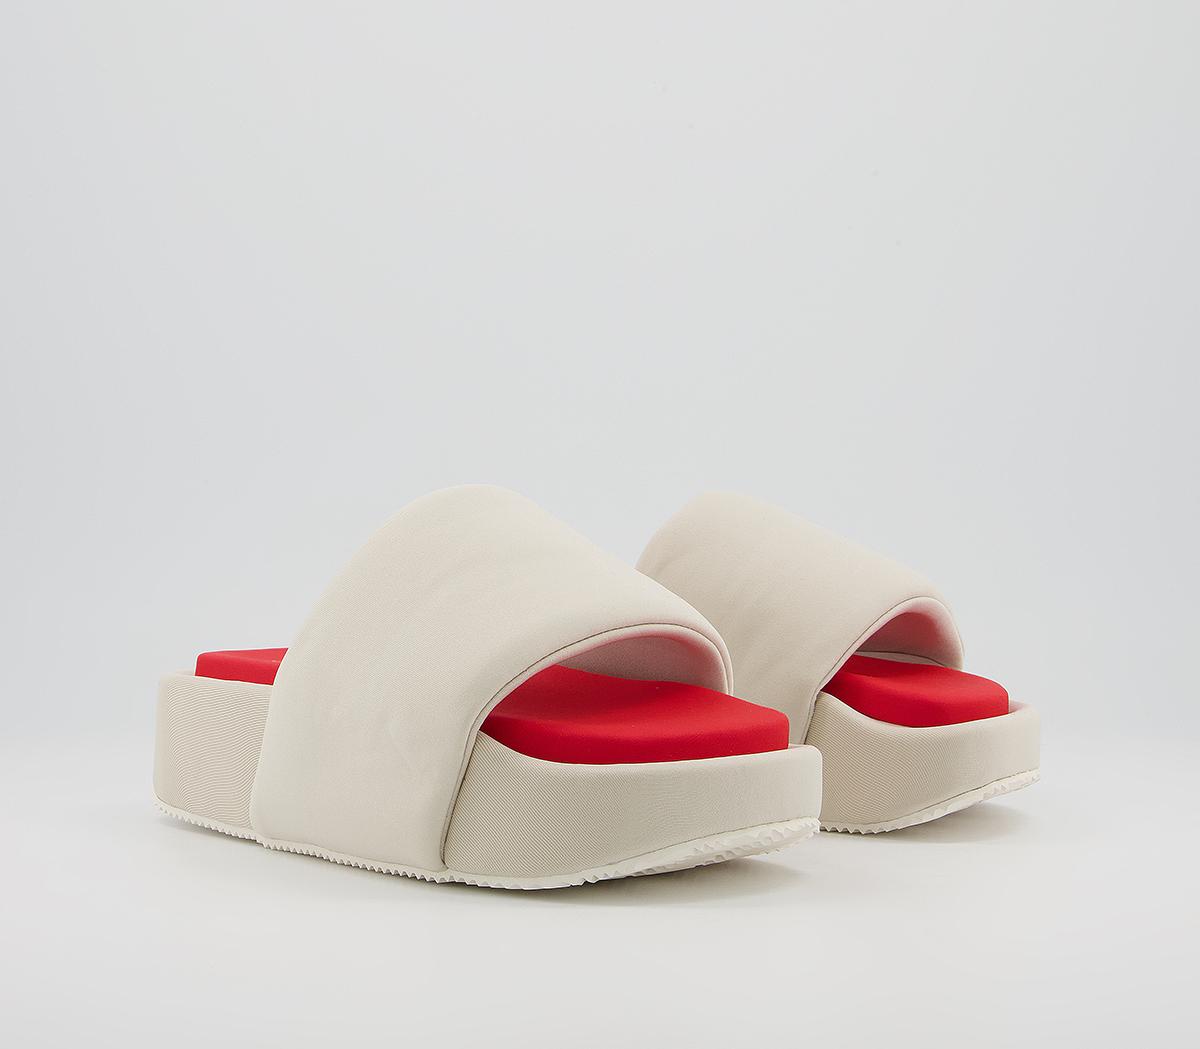 adidas Y3 Y-3 Slides Clear Brown Off White Red - Women’s Sandals